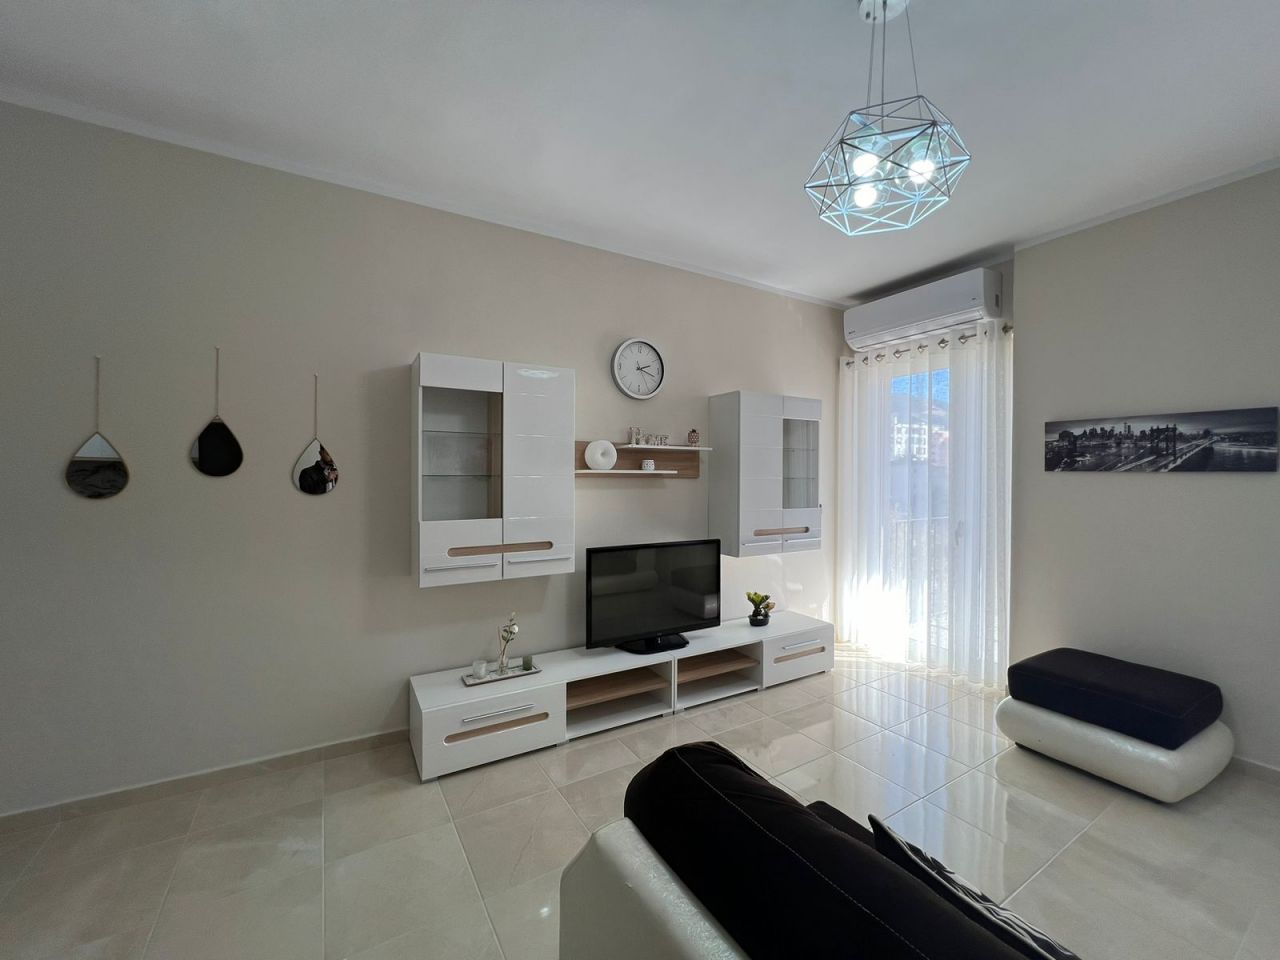 Apartment For Sale In Vlora Albania, Located In A Good Area, Near The Beach